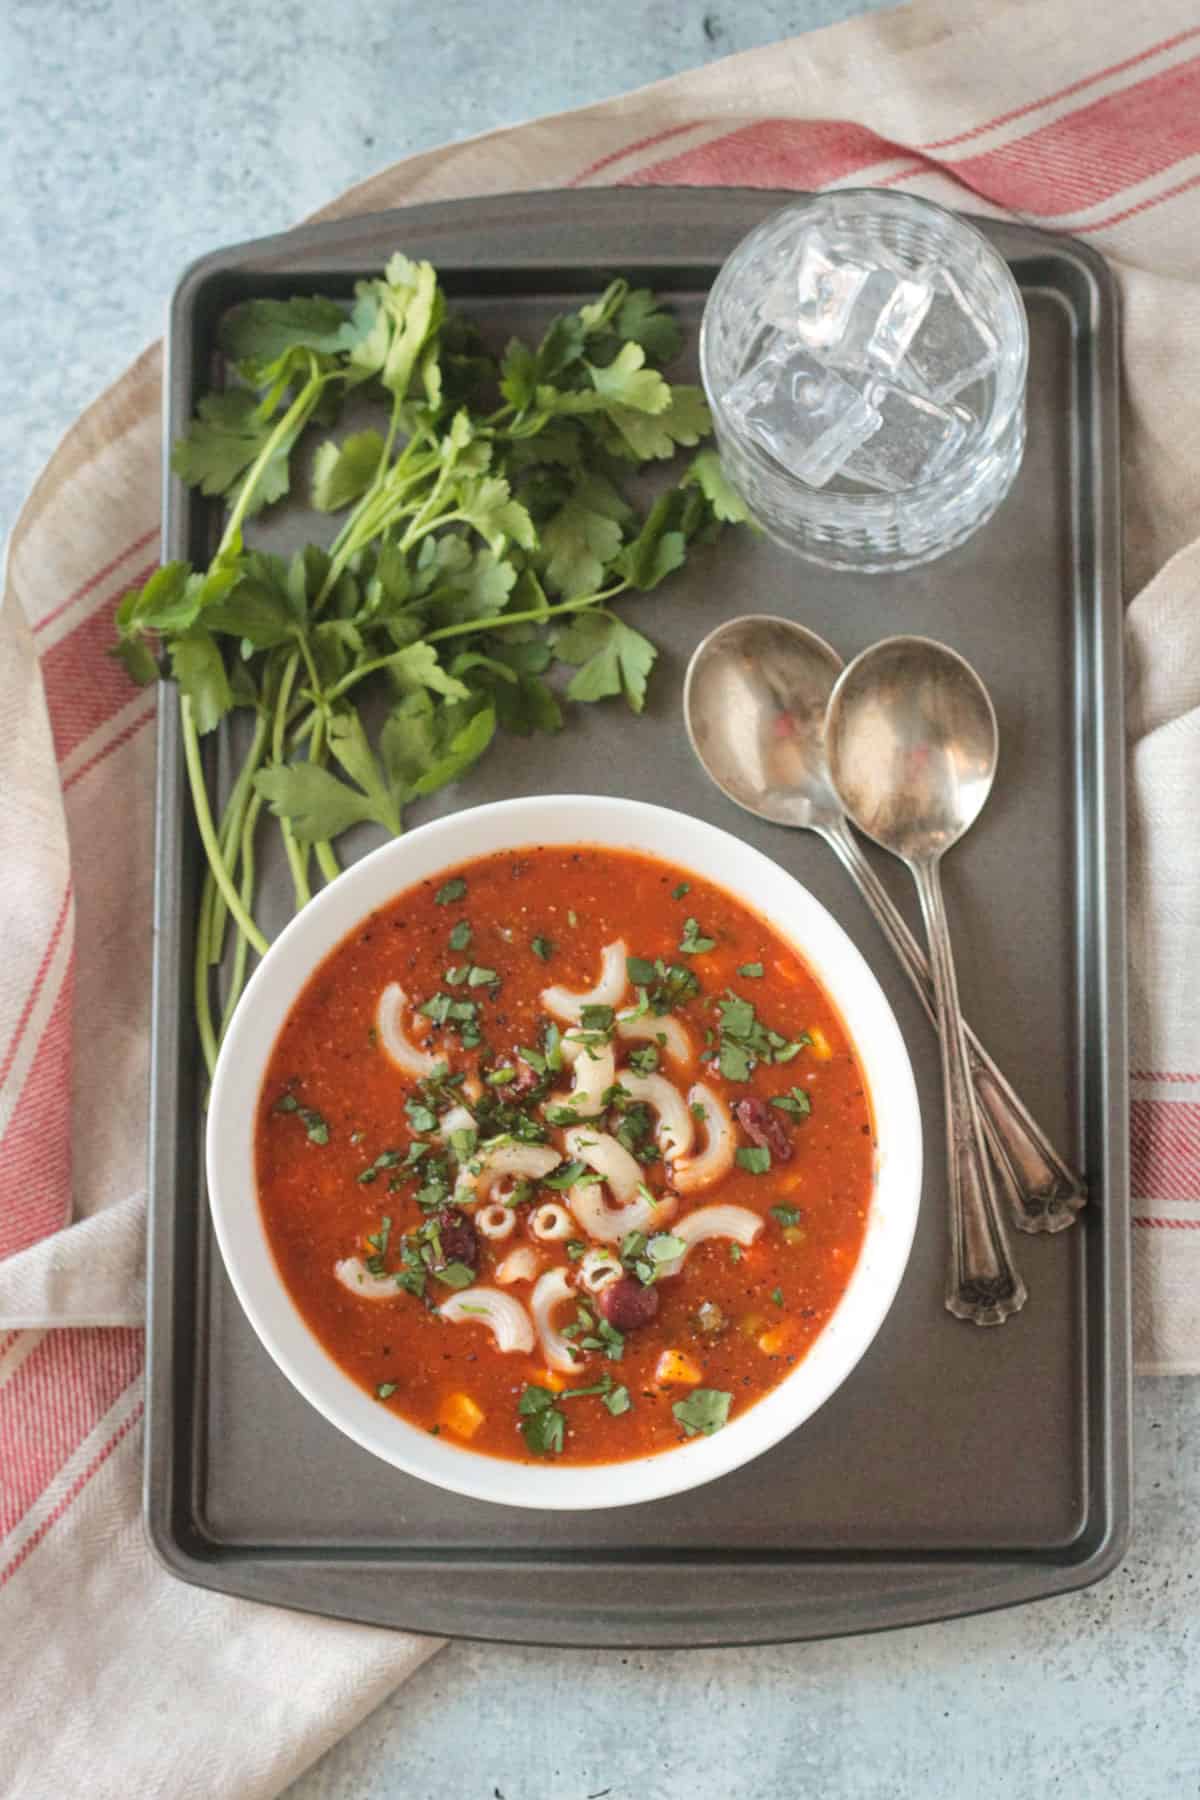 Bowl of soup on a tray with two spoons, glass of water, and bunch of fresh parsley.